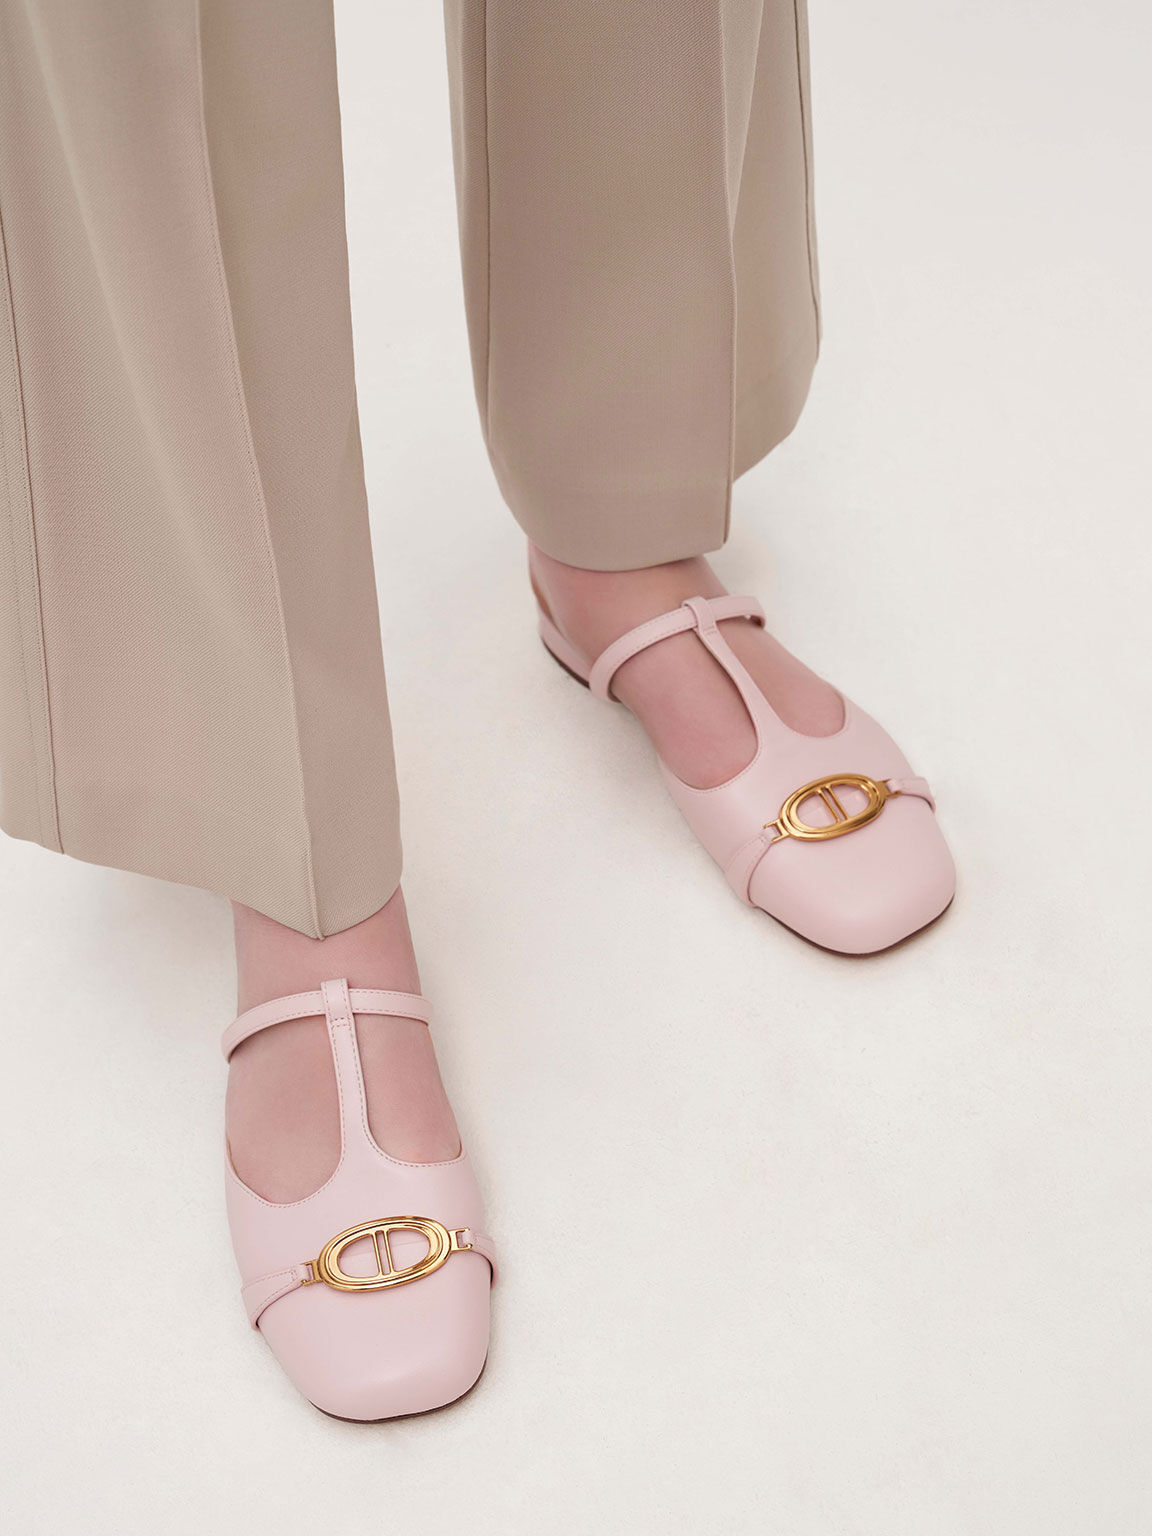 Metallic Accent Cut-Out Flat Mules, Light Pink, hi-res